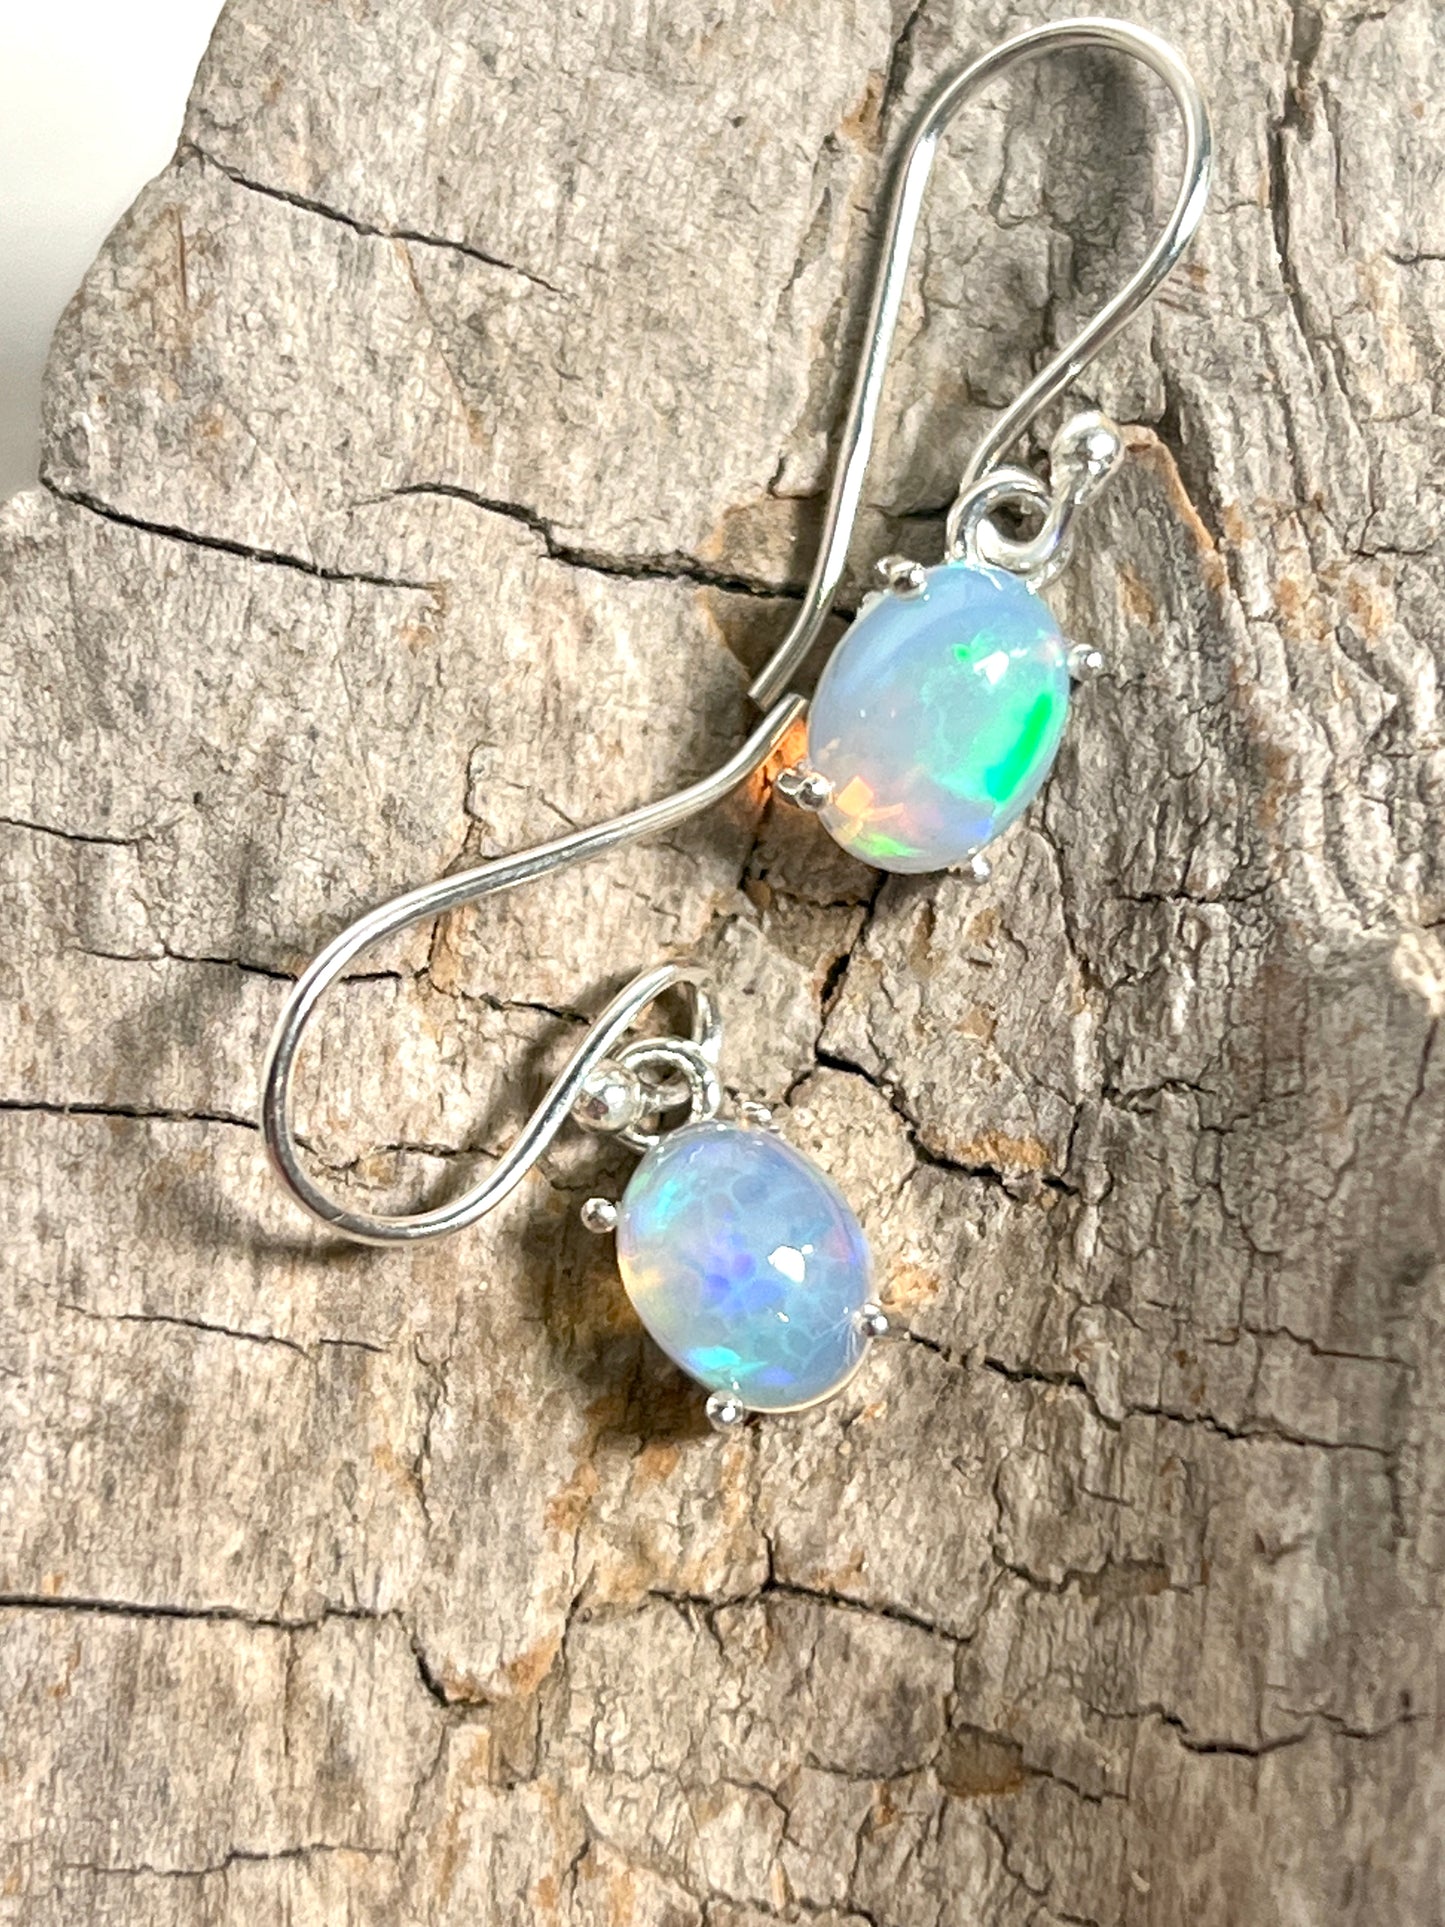 A pair of Super Silver Vibrant Oval Ethiopian Opal Earrings exuding natural brilliance on a rock, showcasing vibrant hues.